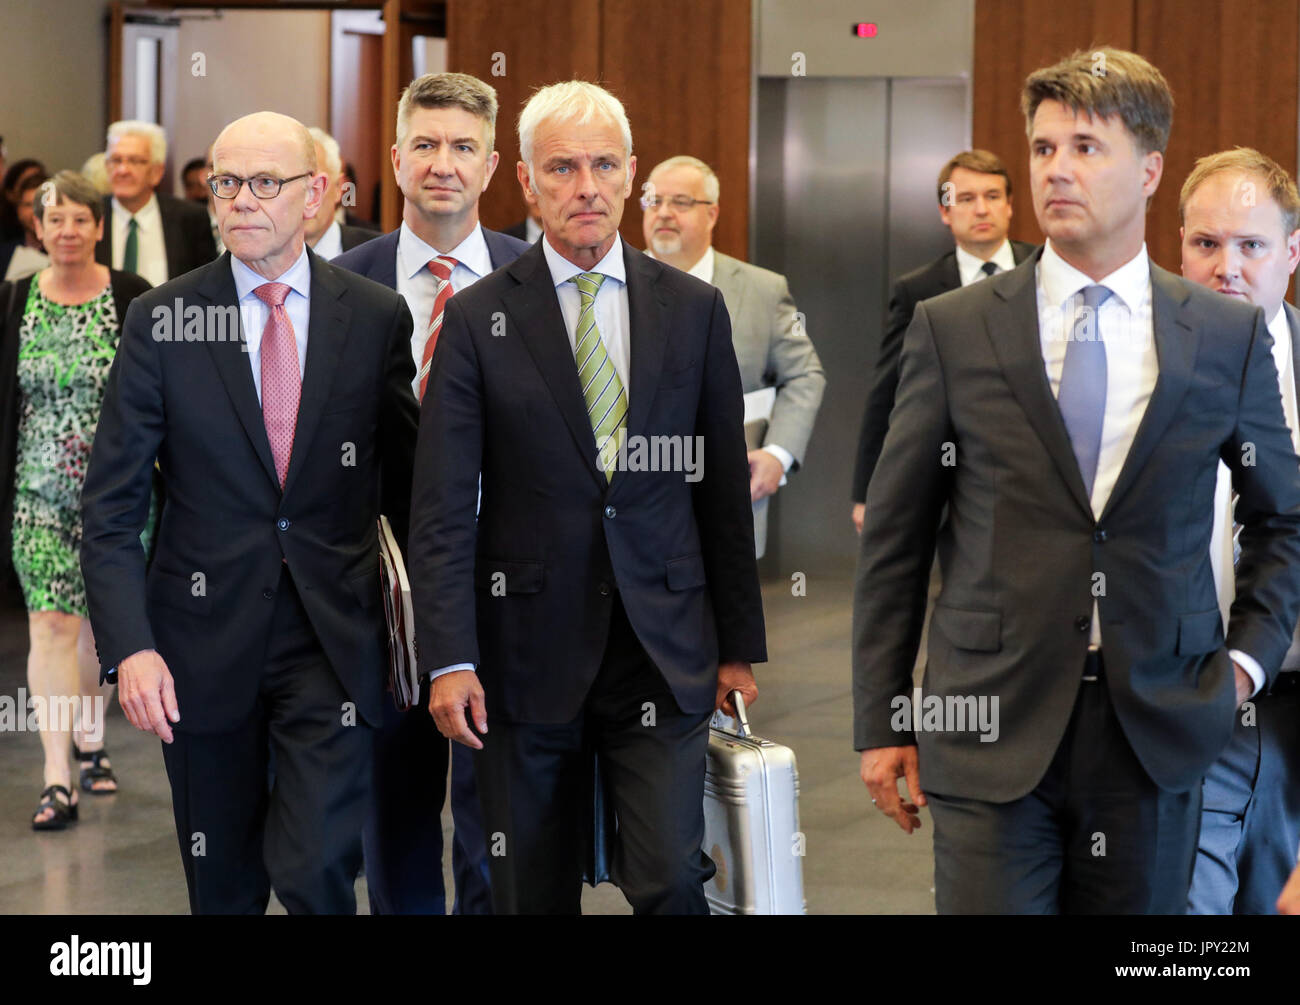 Berlin, Germany. 2nd Aug, 2017. dpatop - (L-R) Chief lobbyist for Volkwagen Thomas Steg, Chairman of the Board of Volkswagen Matthias Mueller and Chairman of the Board at BMW Harald Krueger leave the Federal Ministry of the Interior after a summit on diesel and the reduction of harmful emmissions in Berlin, Germany on 2 August, 2017. The diesel summit was relocated from the Federal Ministry of Transport to the Federal Ministry of the Interior. Credit: dpa picture alliance/Alamy Live News Stock Photo